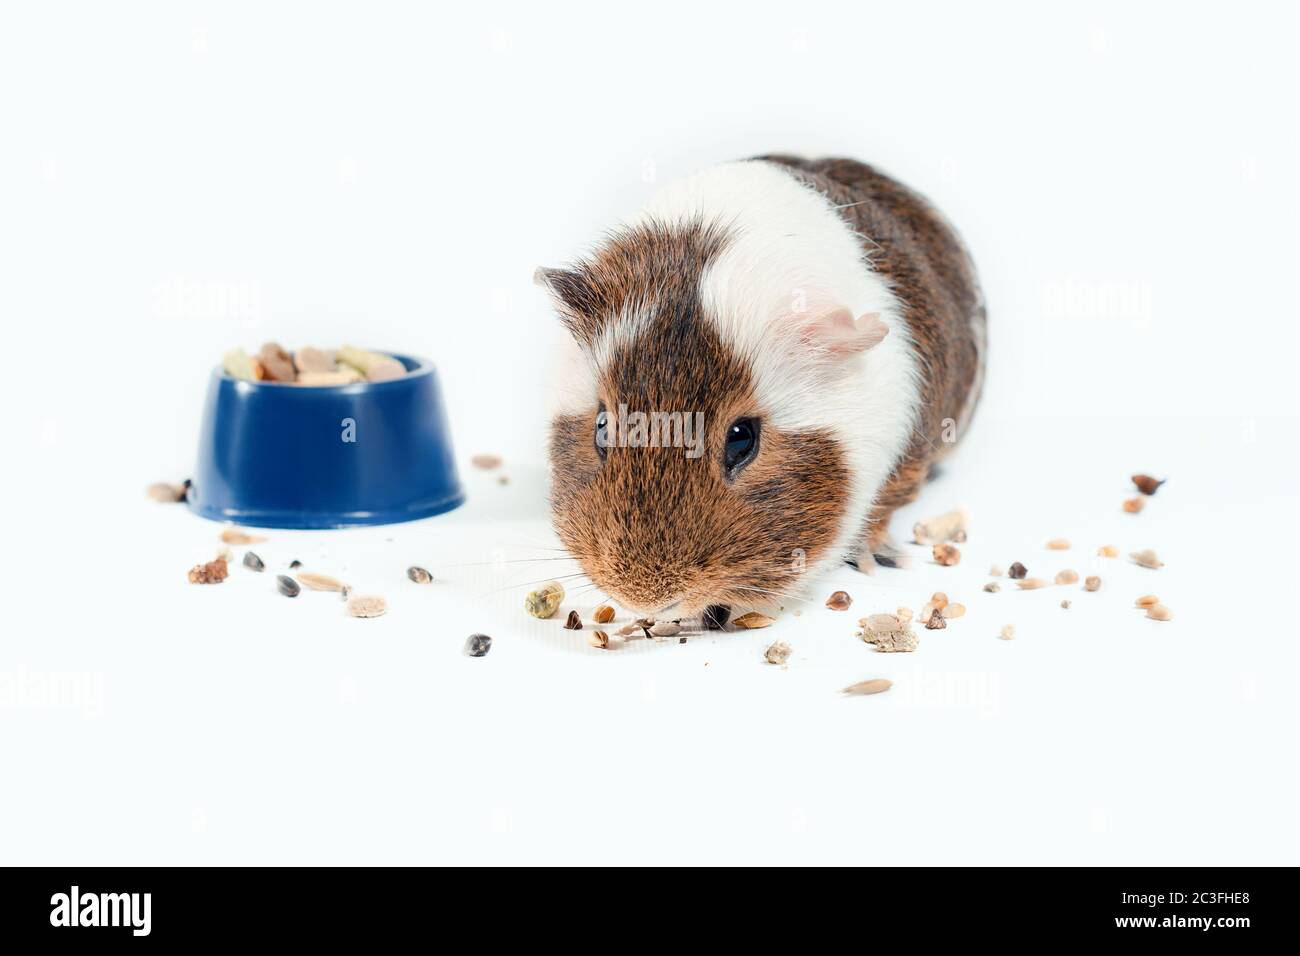 guinea pig eats its food from a blue bowl on a white background Stock Photo